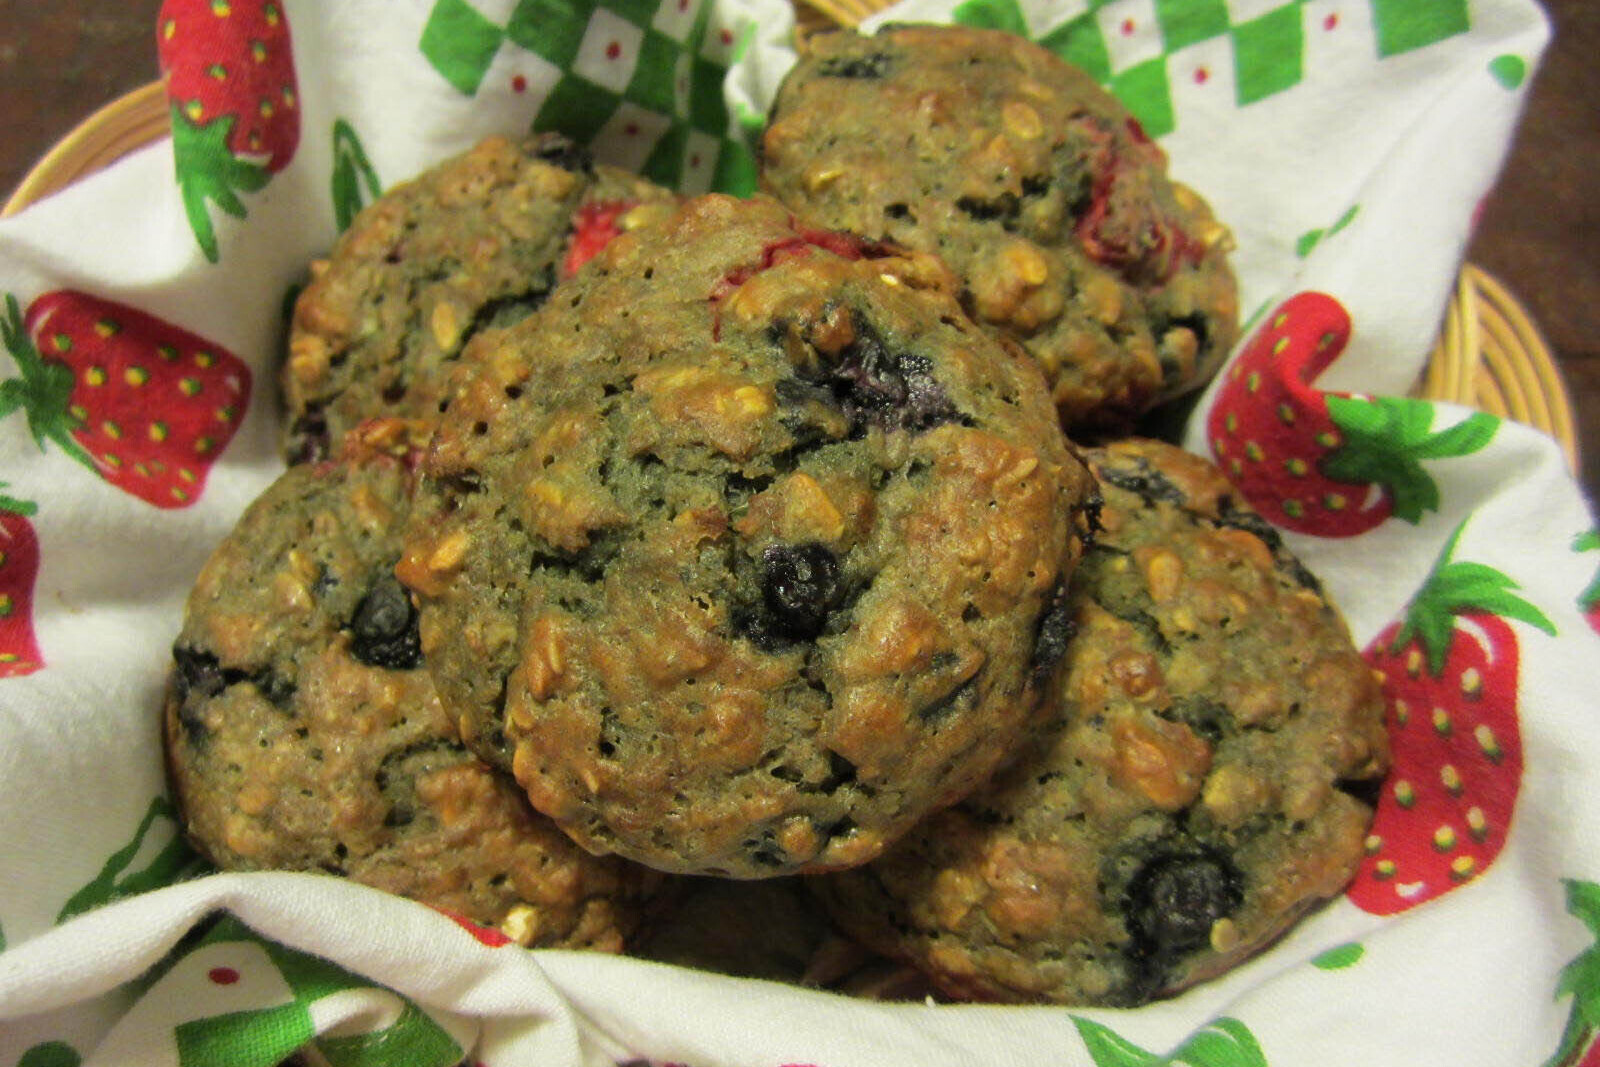 A basket full of oat blueberry muffins